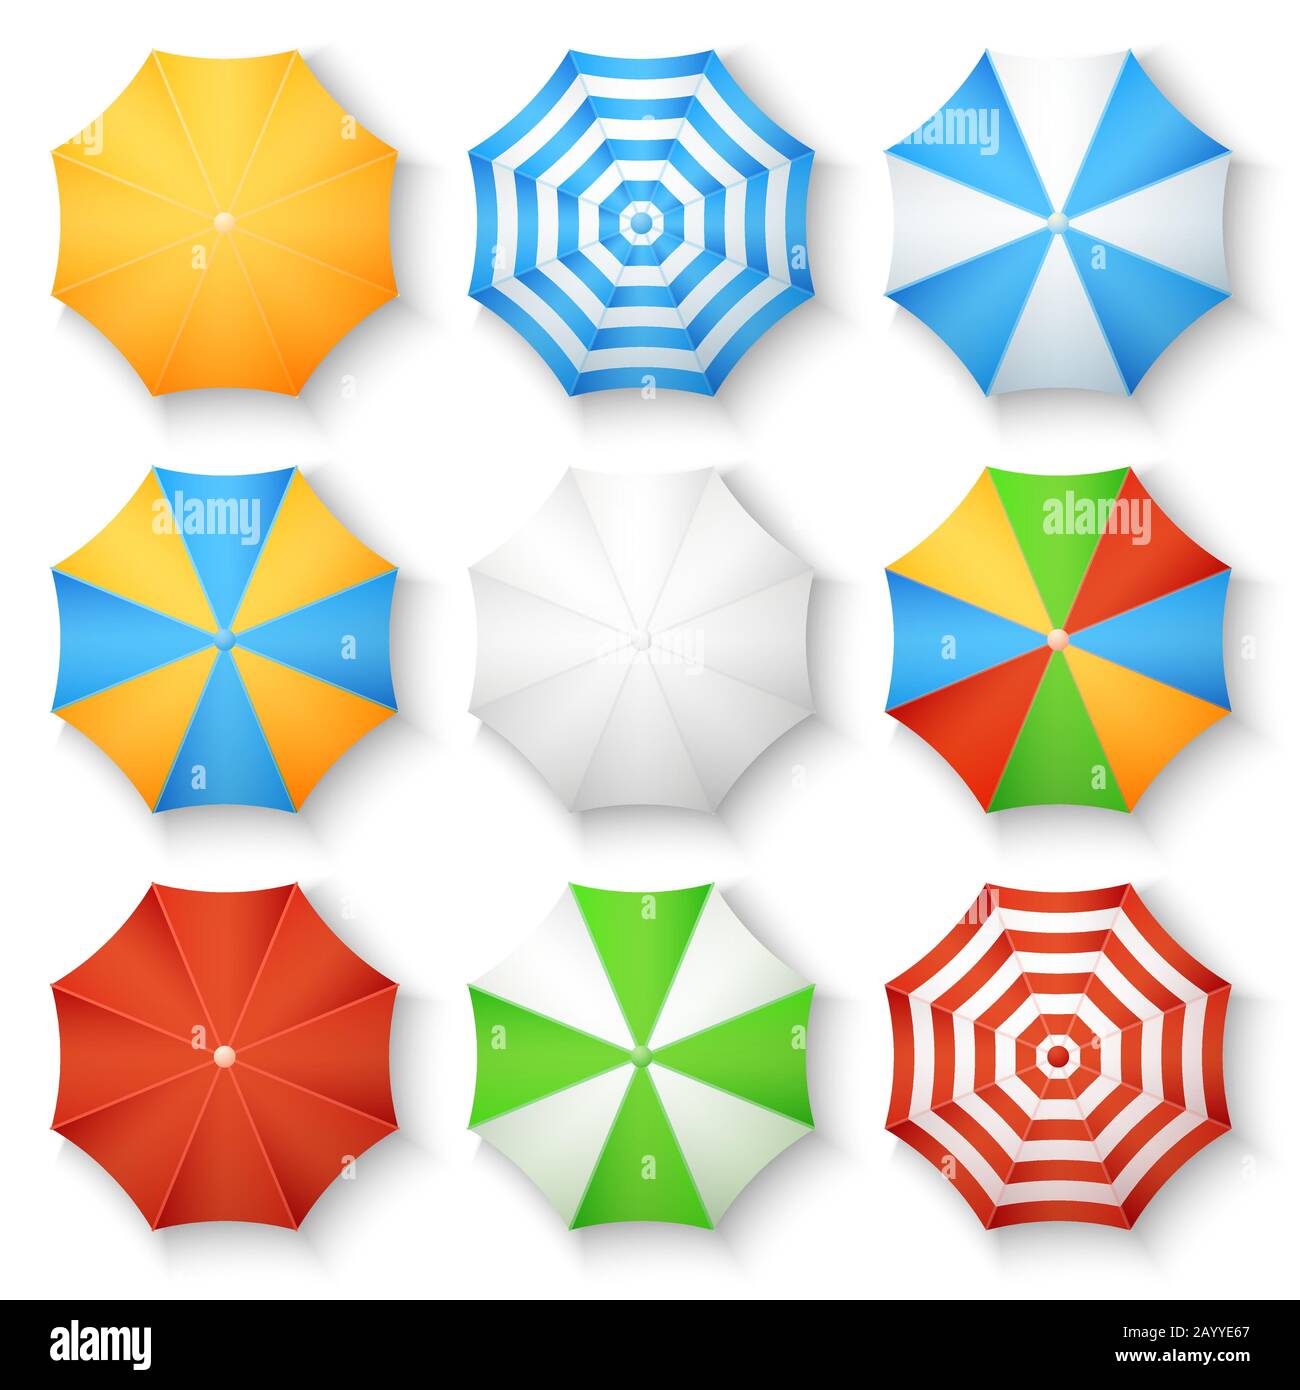 Beach sun umbrellas top view vector icons. Set of parasol with colored striped pattern illustration Stock Vector